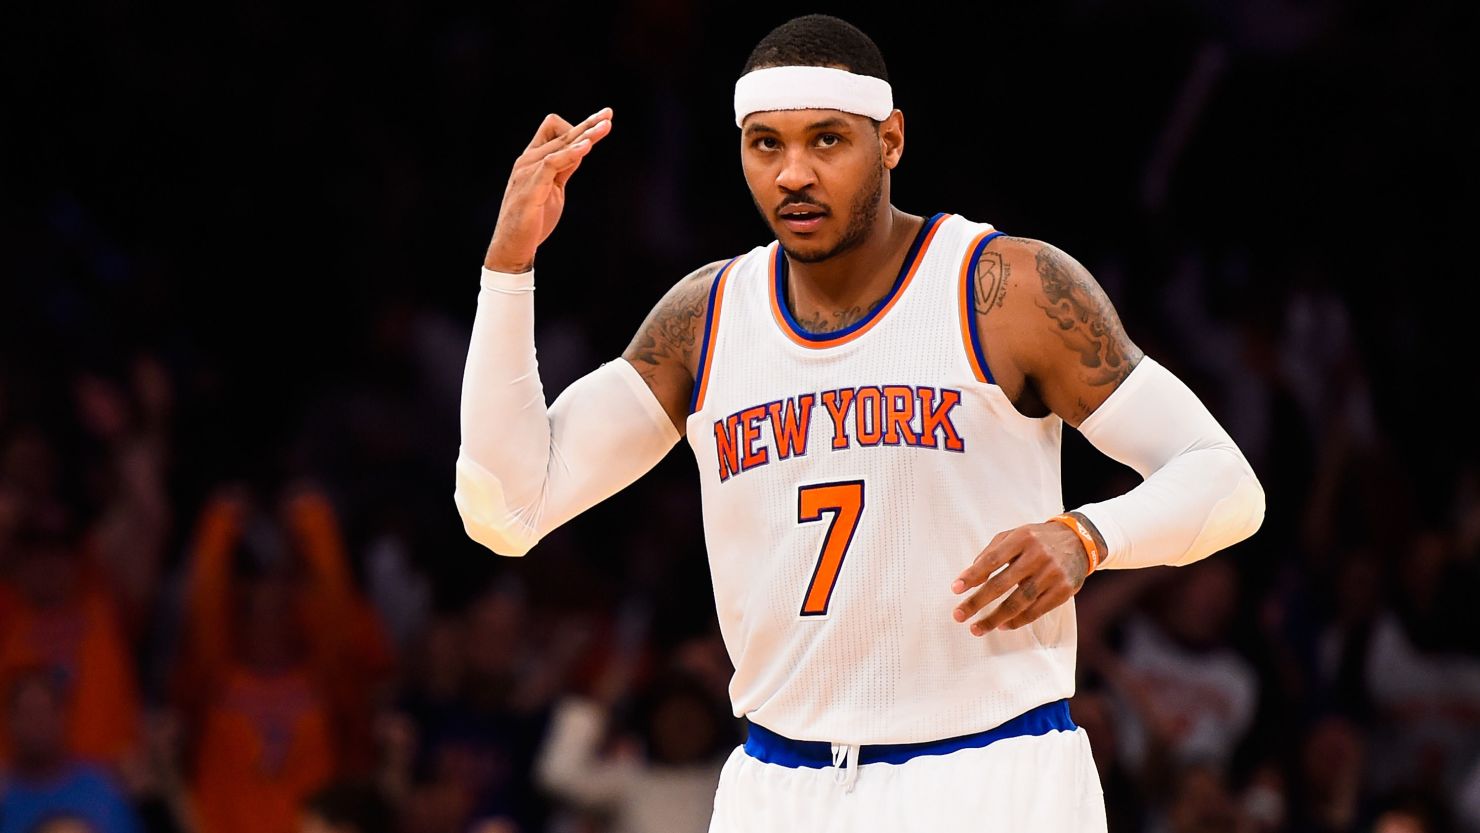 Carmelo Anthony, 10-time NBA All-Star and one of basketball's greatest  scorers, announces retirement